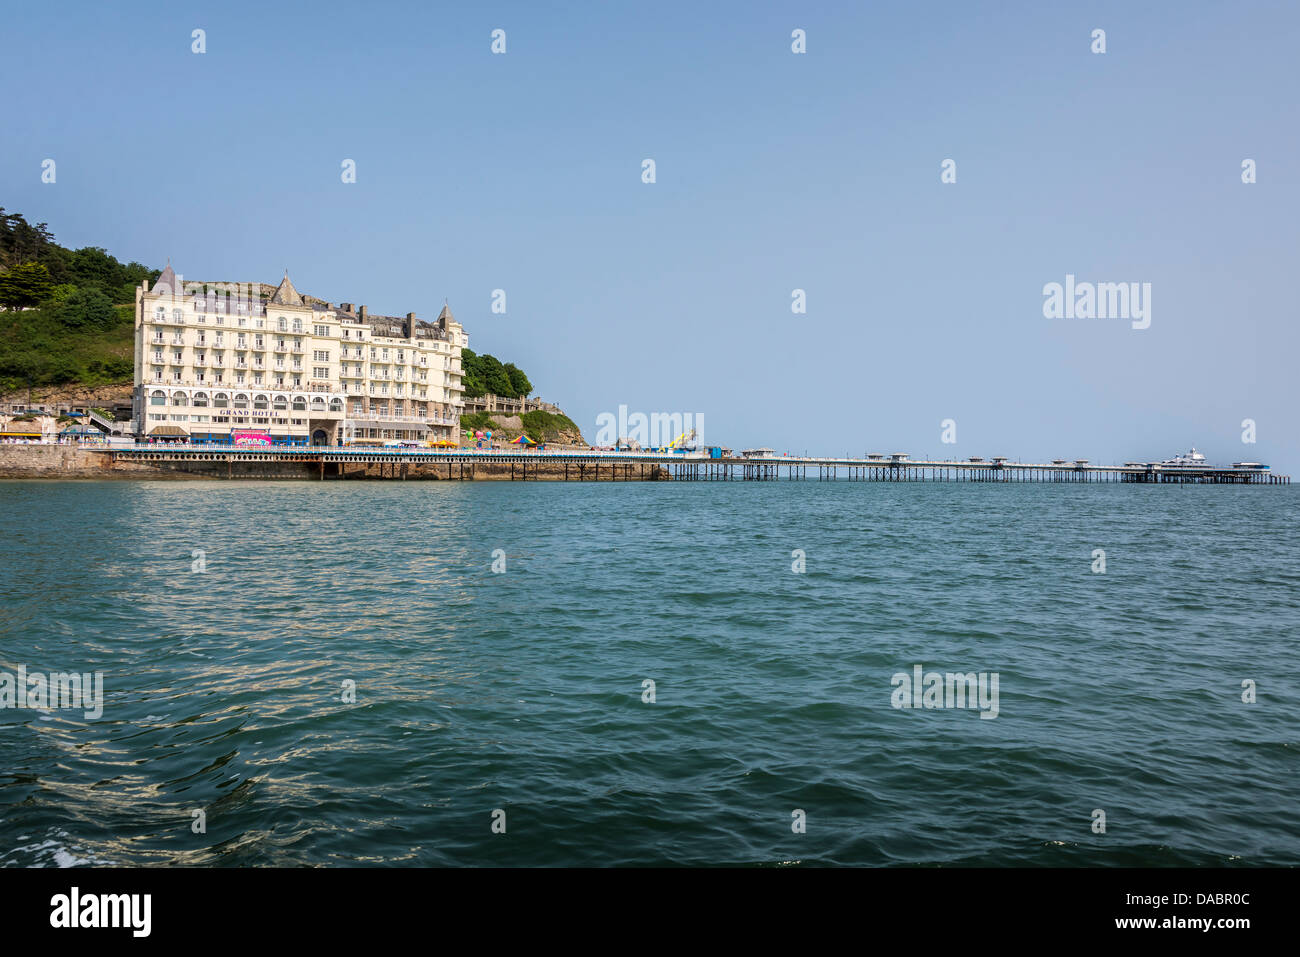 Llandudno pier and the Great Orme on the North Bay of the North Wales seaside town. Stock Photo